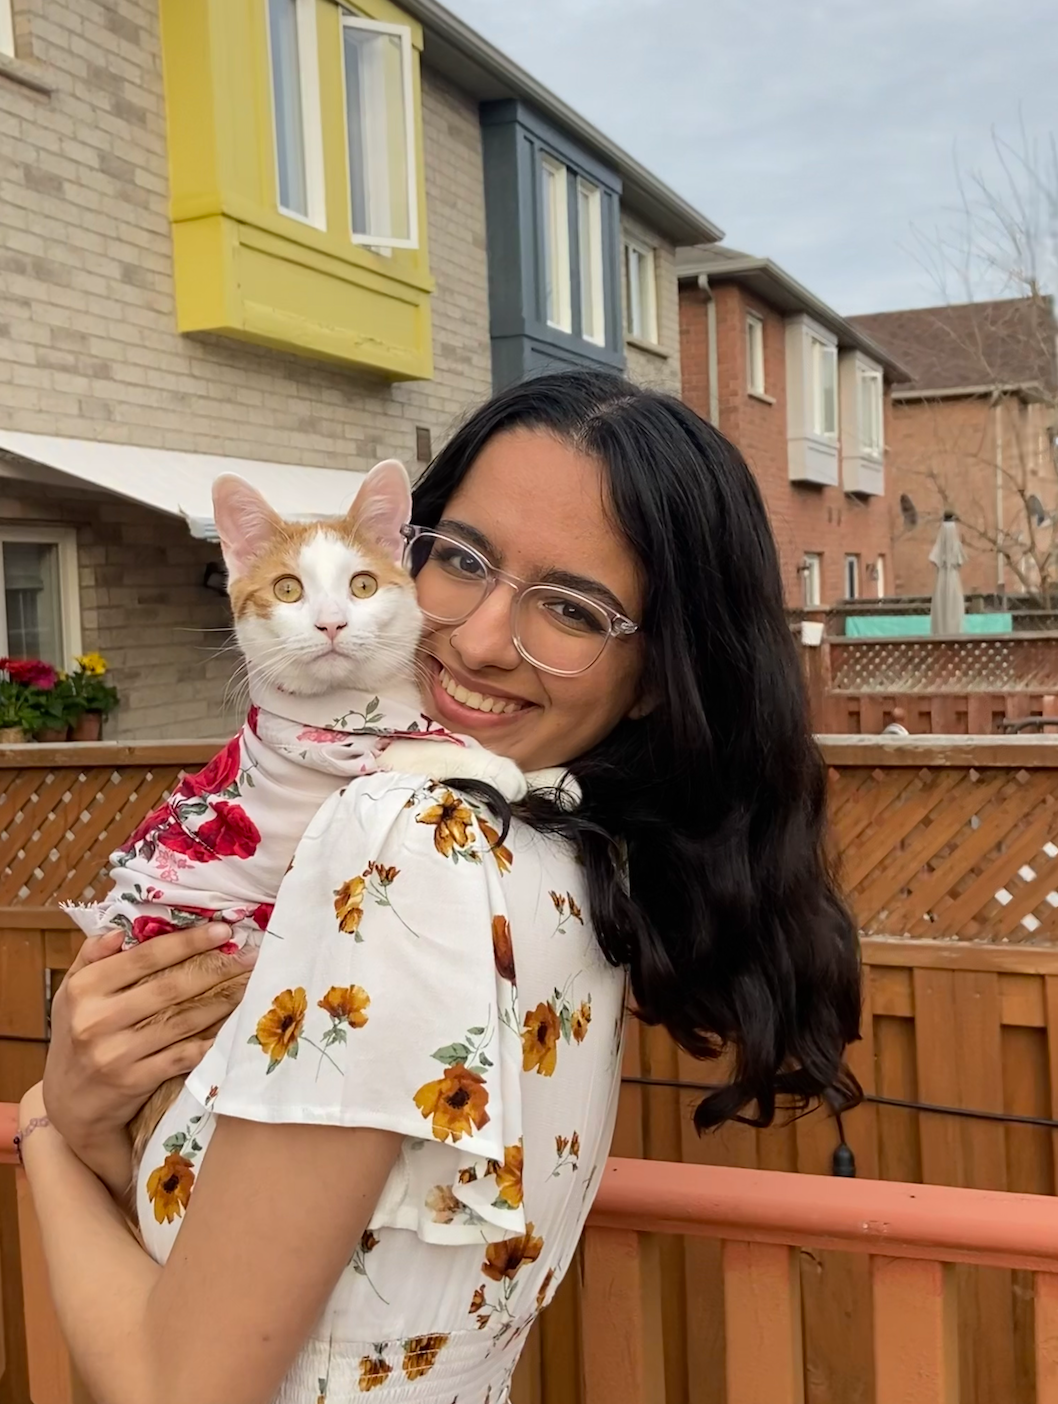 A photo of Ina holding a cat and smiling.